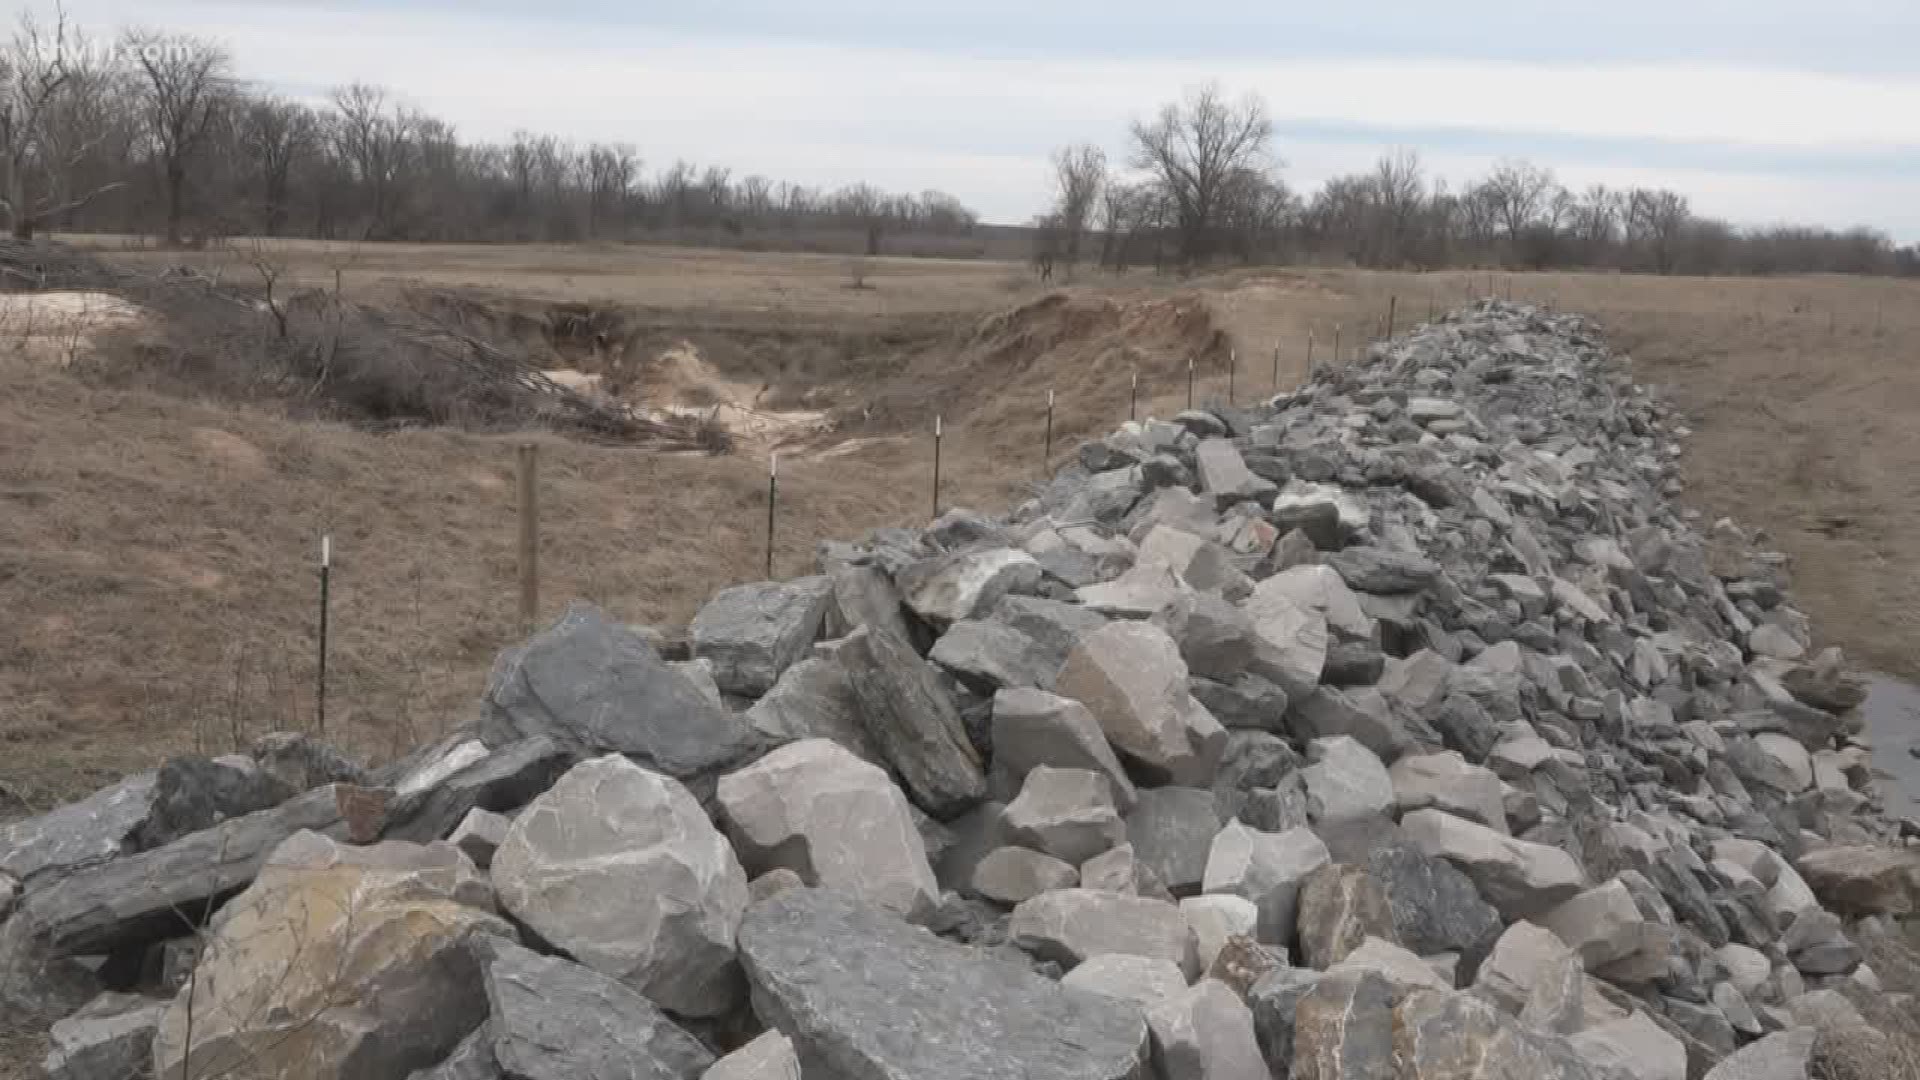 Last May, the Faulkner County levee stood the test of a lifetime after almost collapsing from historic flood waters. The damage is still there, but not for long.